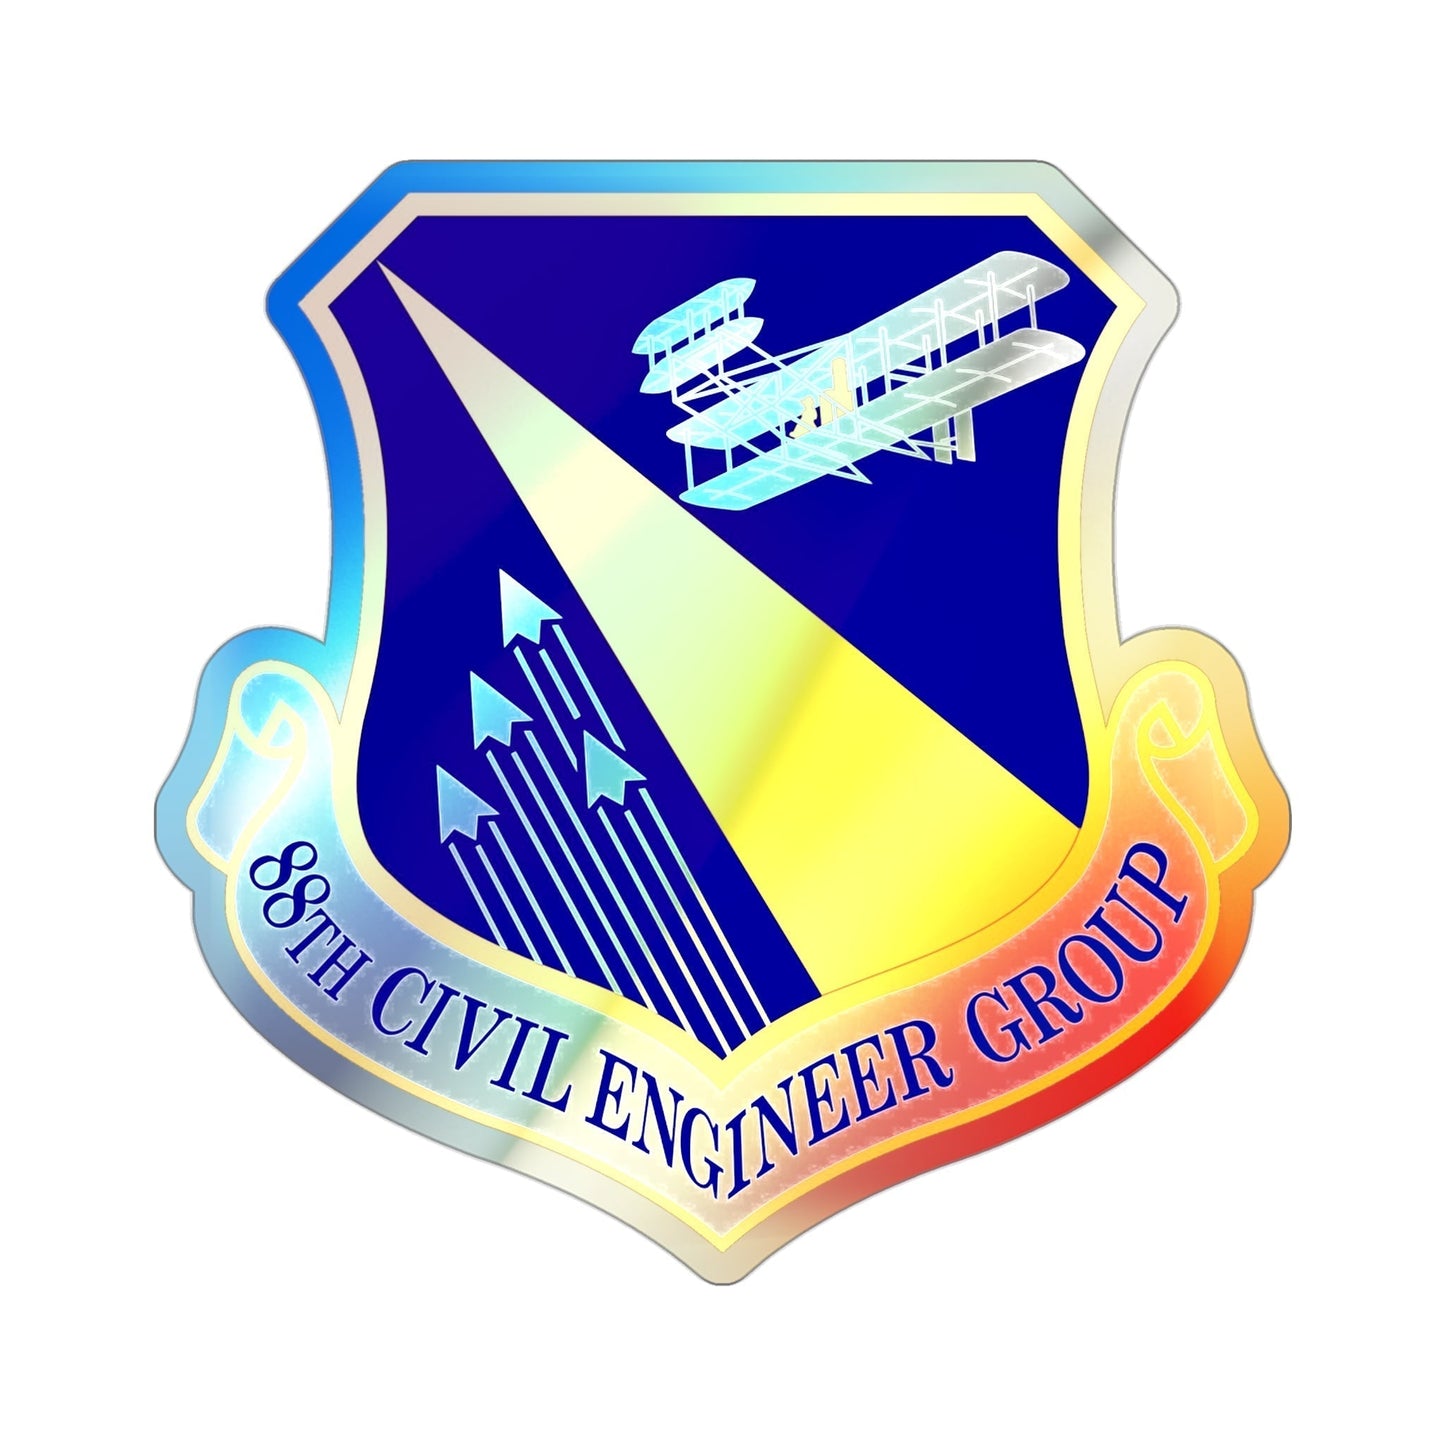 88 Civil Engineer Group AFMC (U.S. Air Force) Holographic STICKER Die-Cut Vinyl Decal-3 Inch-The Sticker Space